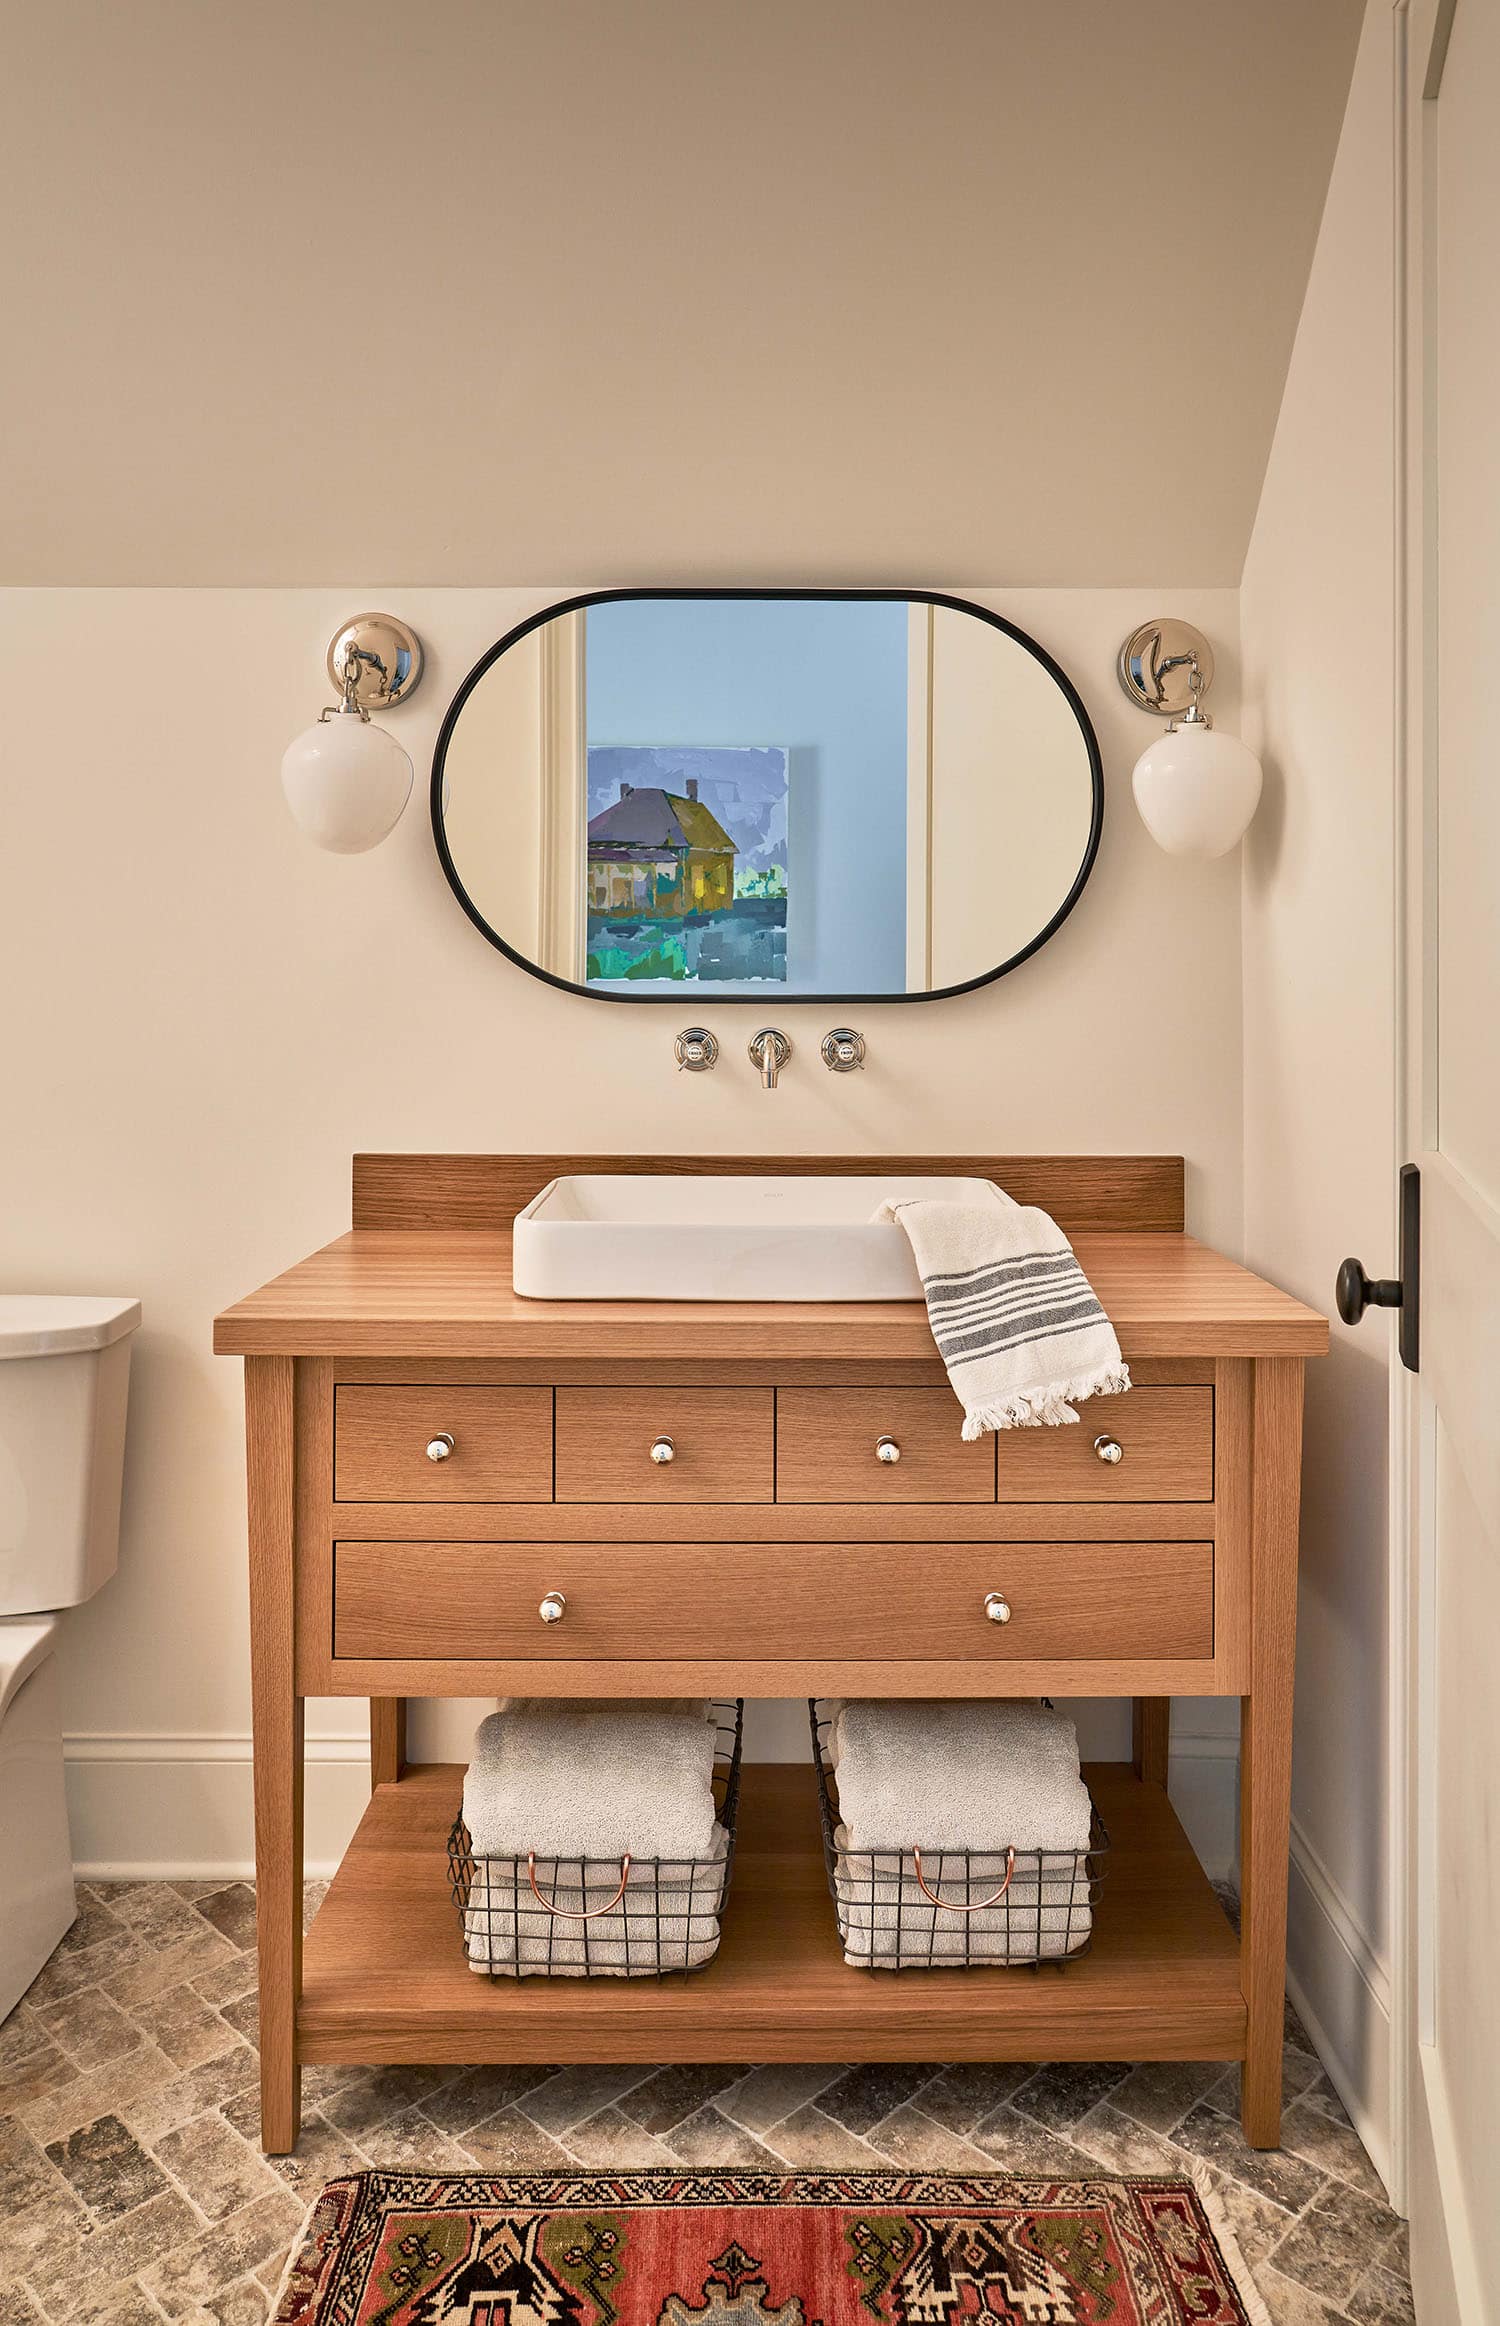 Guest bathroom with wooden vanity, modern farmhouse style in custom home Charlotte, NC